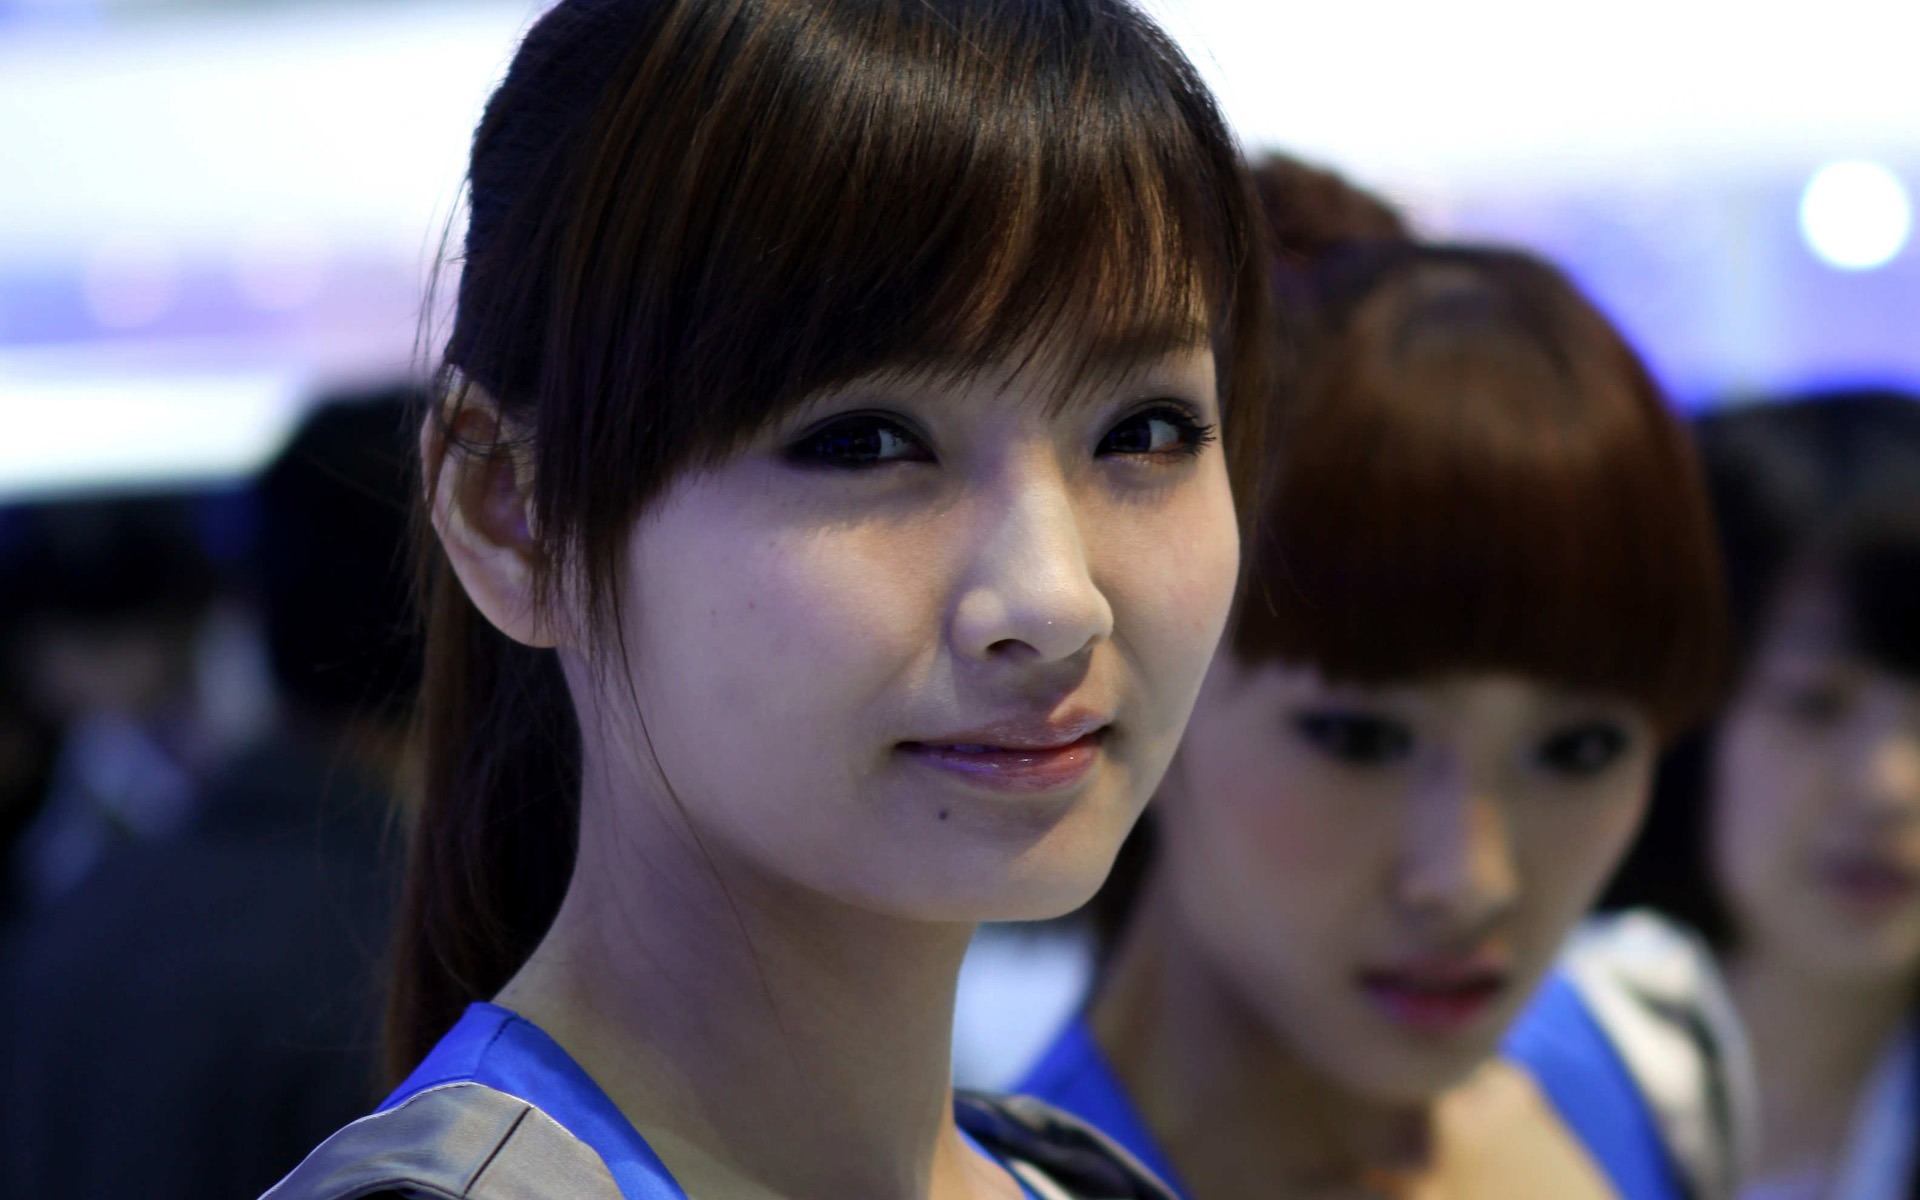 2010 Beijing Auto Show car models Collection (2) #3 - 1920x1200